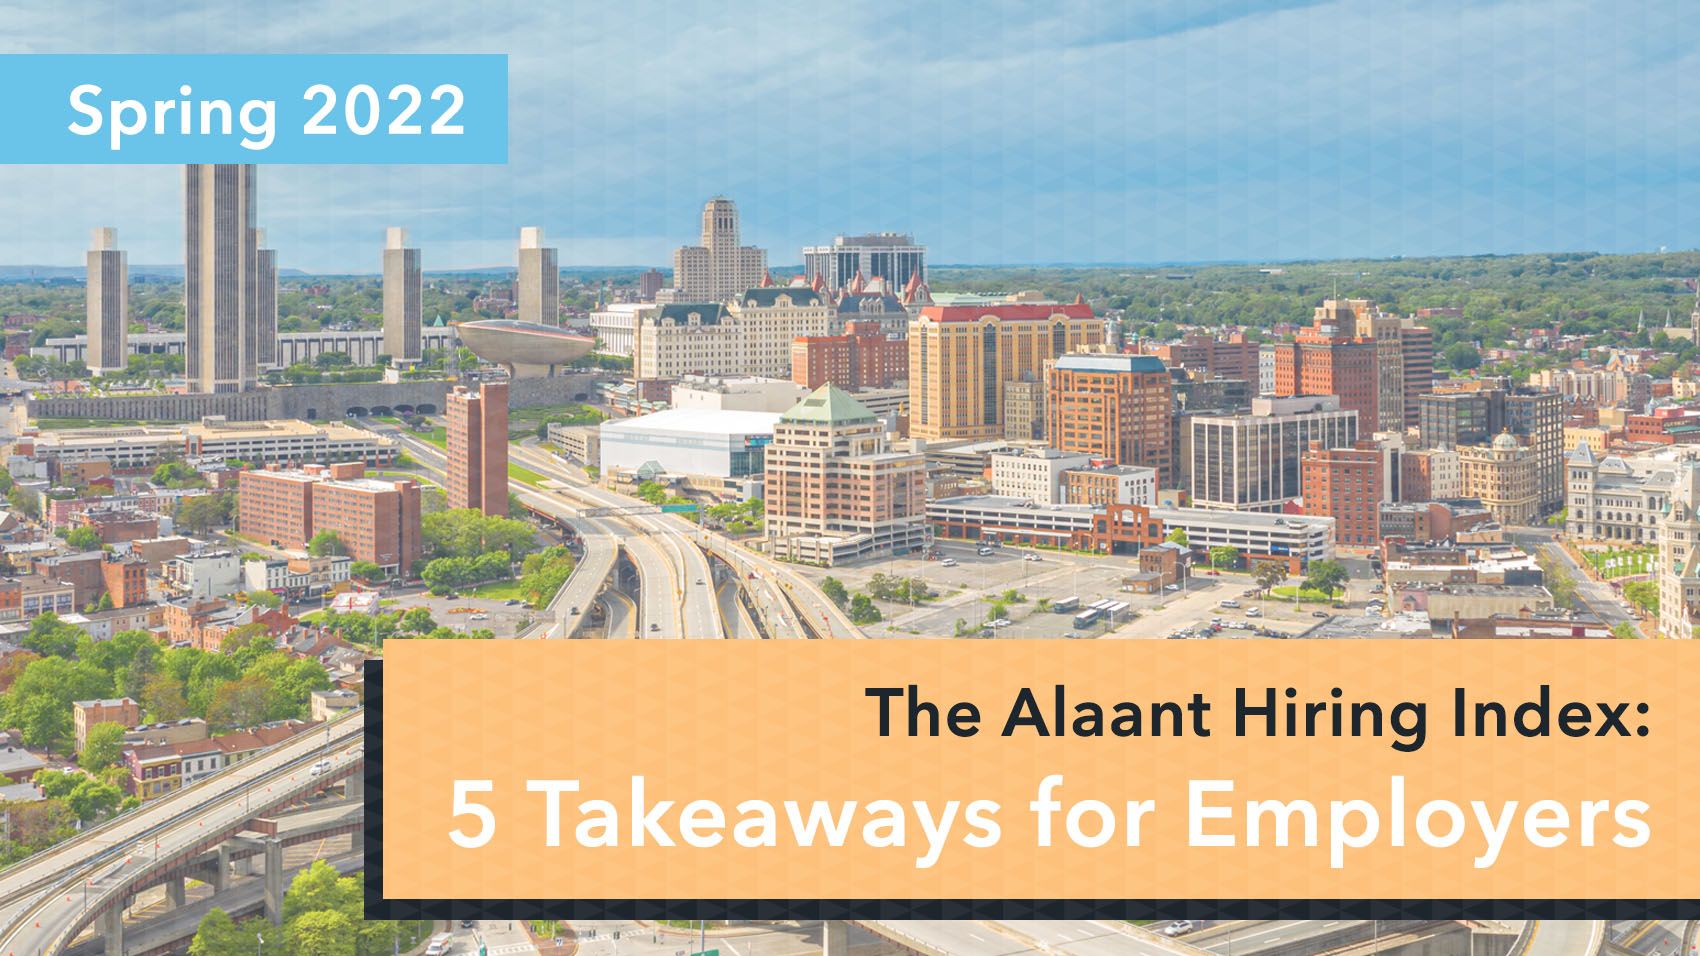 The Alaant Hiring Index: 5 Takeaways for Employers